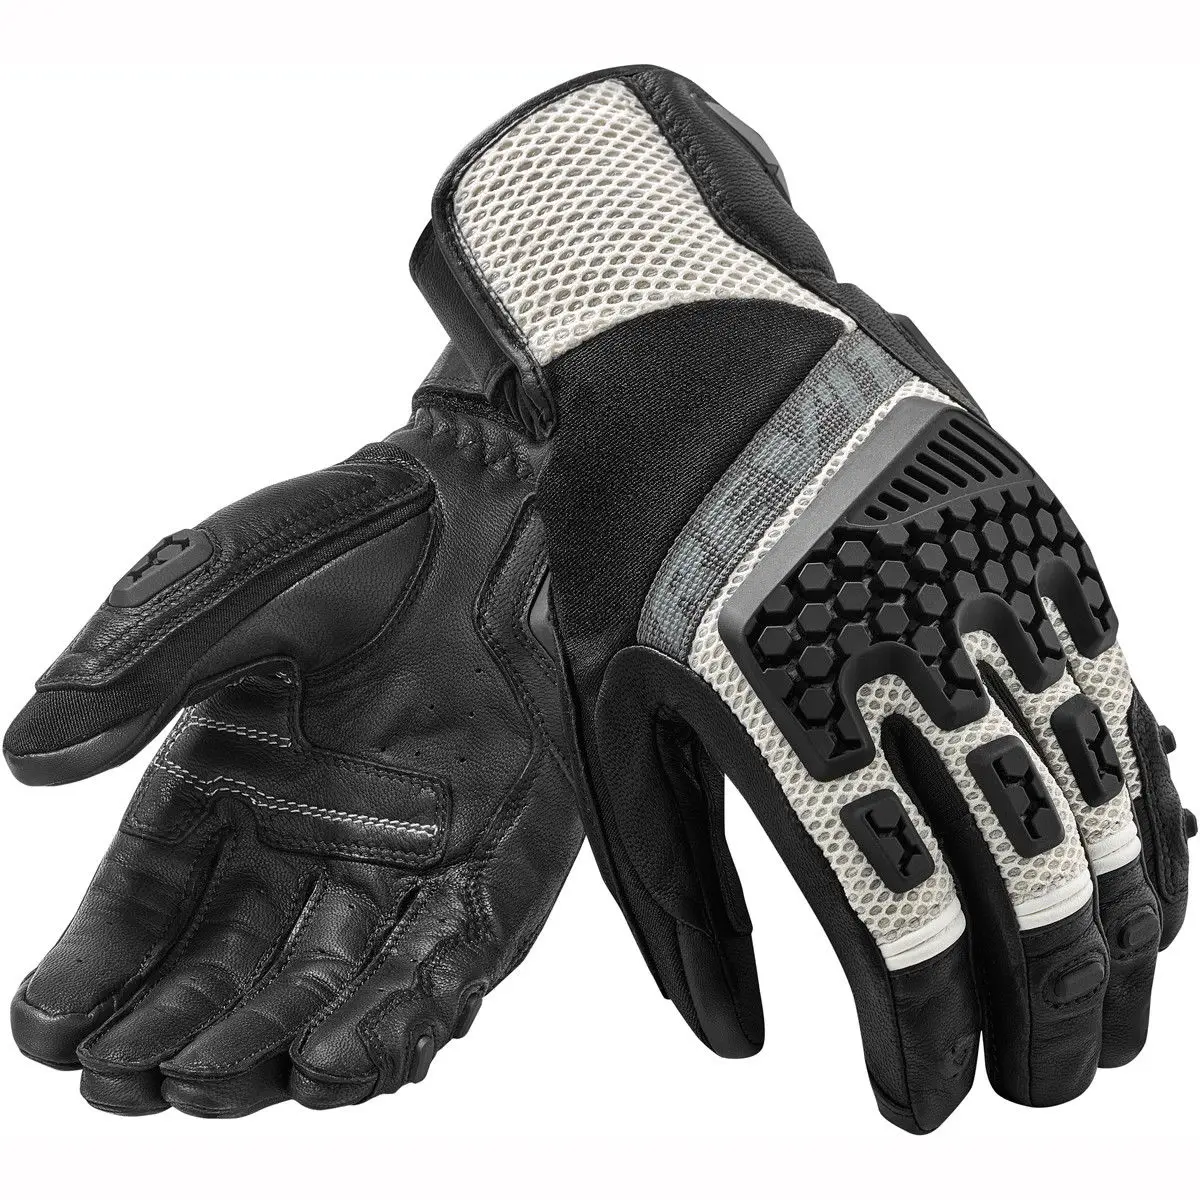 

New Revit Sand 3 Black Trial Motorcycle Adventure Touring Ventilated Gloves Genuine Leather Motorbike Racing Gloves